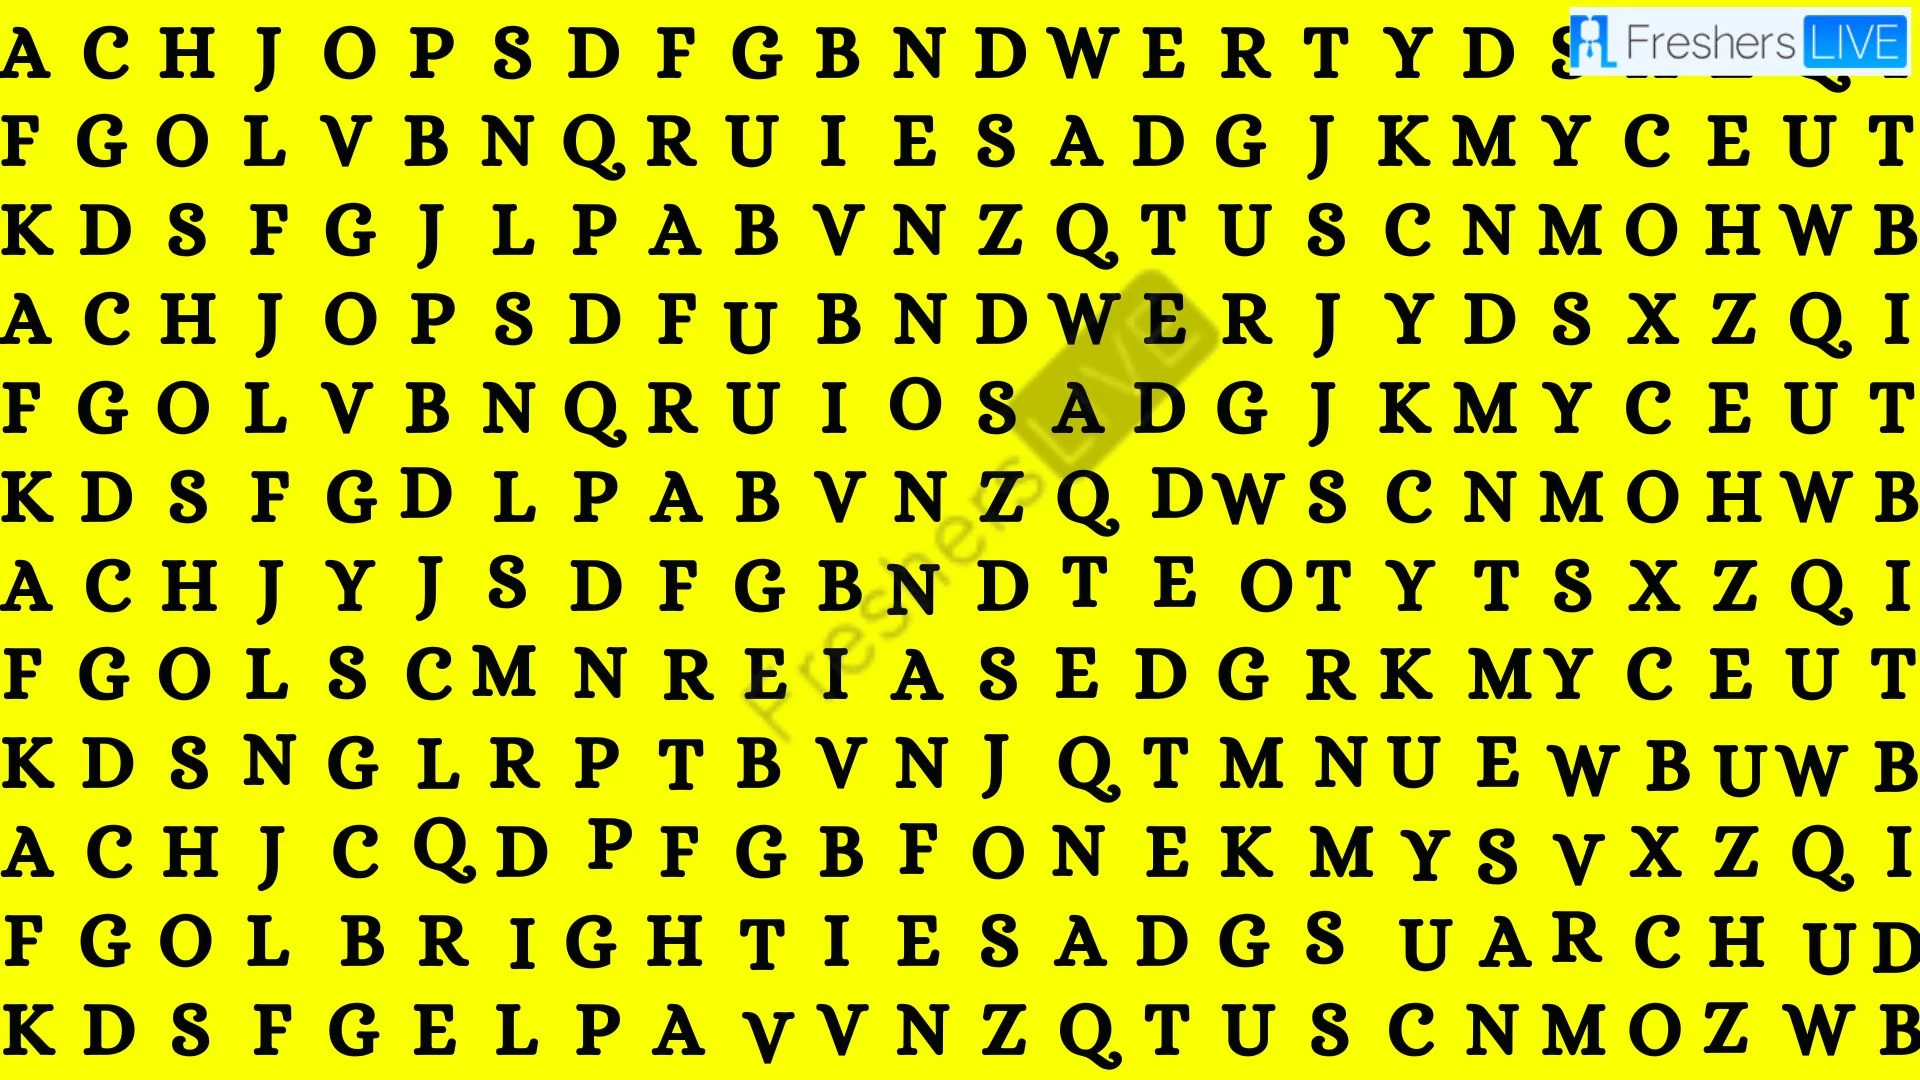 Only 20/20 HD Vision People Can Find the Word Bright in Less Than 7 Seconds